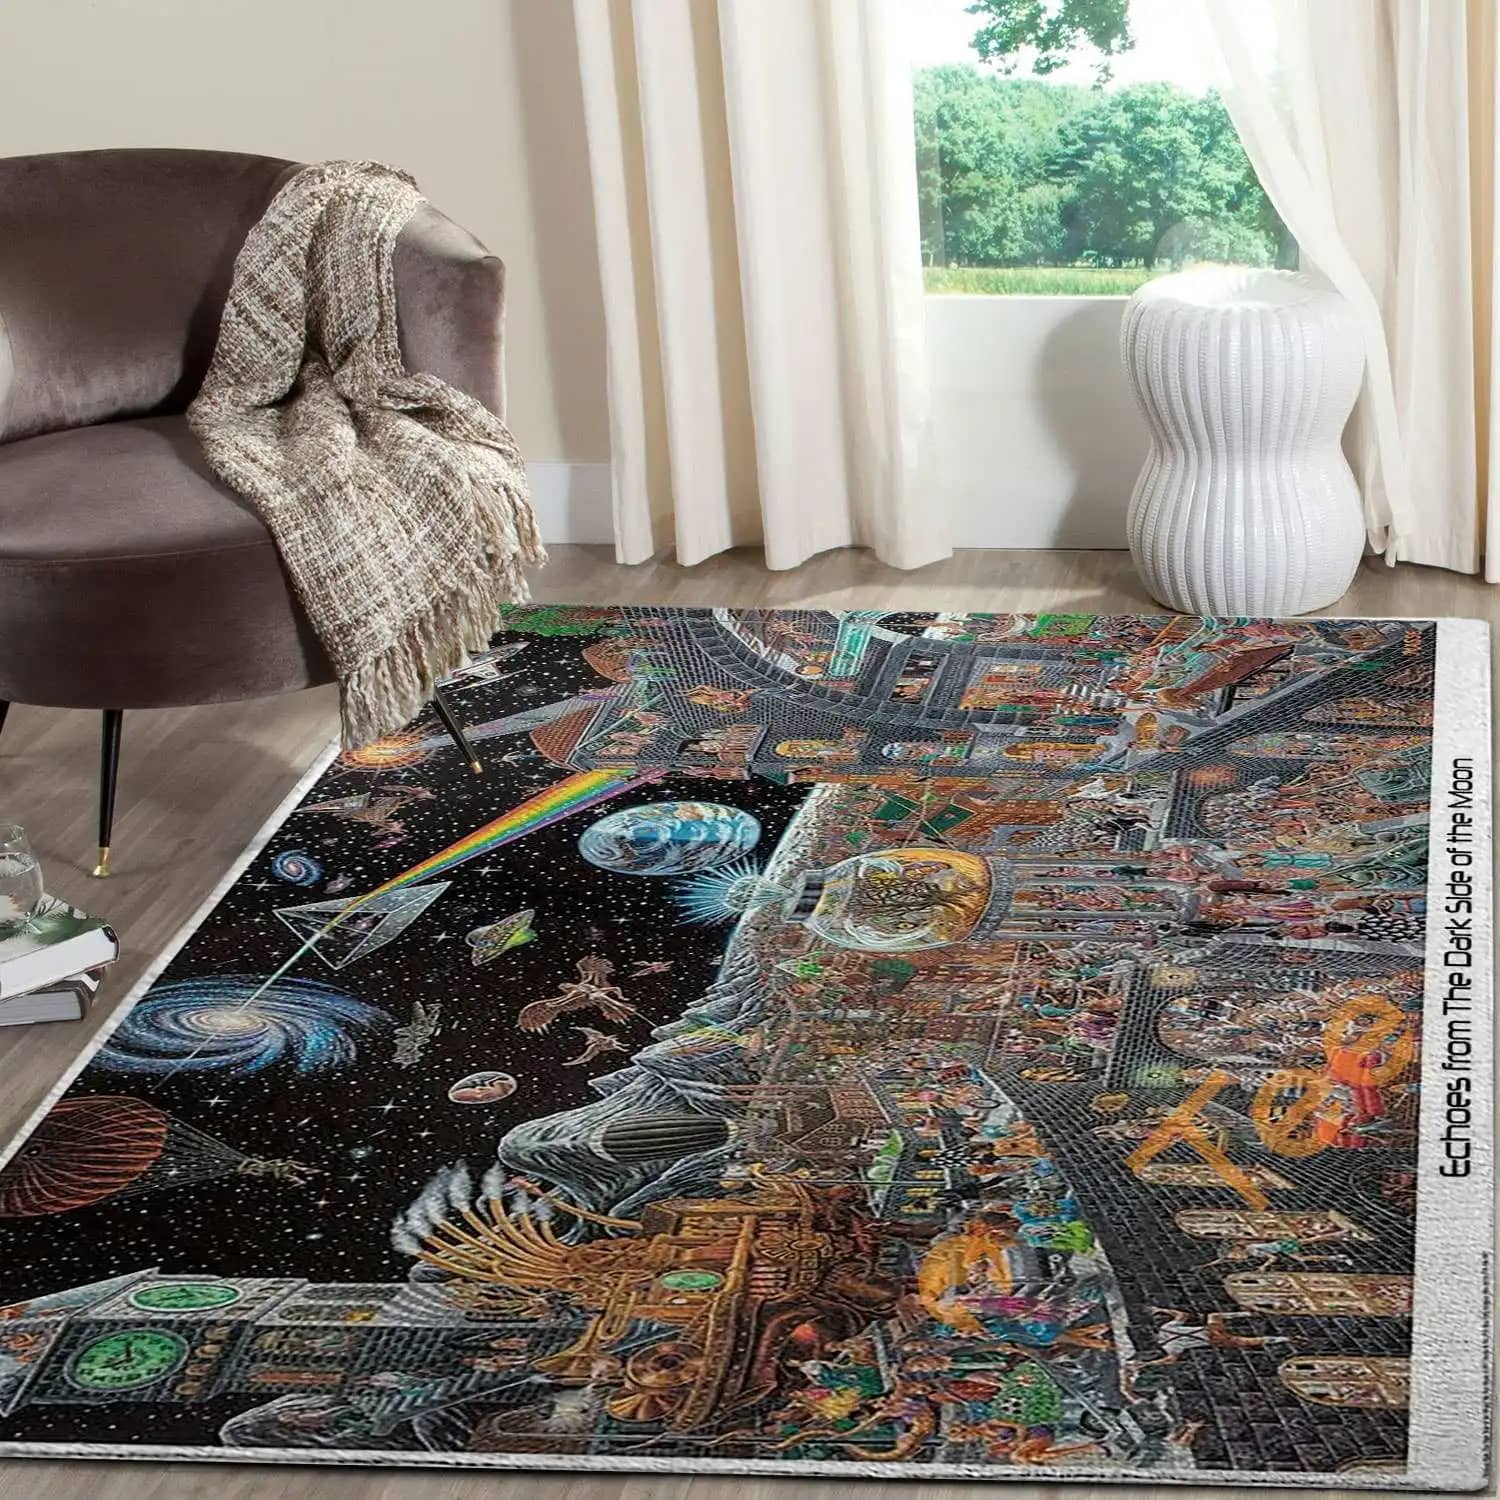 Echoes From The Darkside Of The Moon   Tom Masse Rug